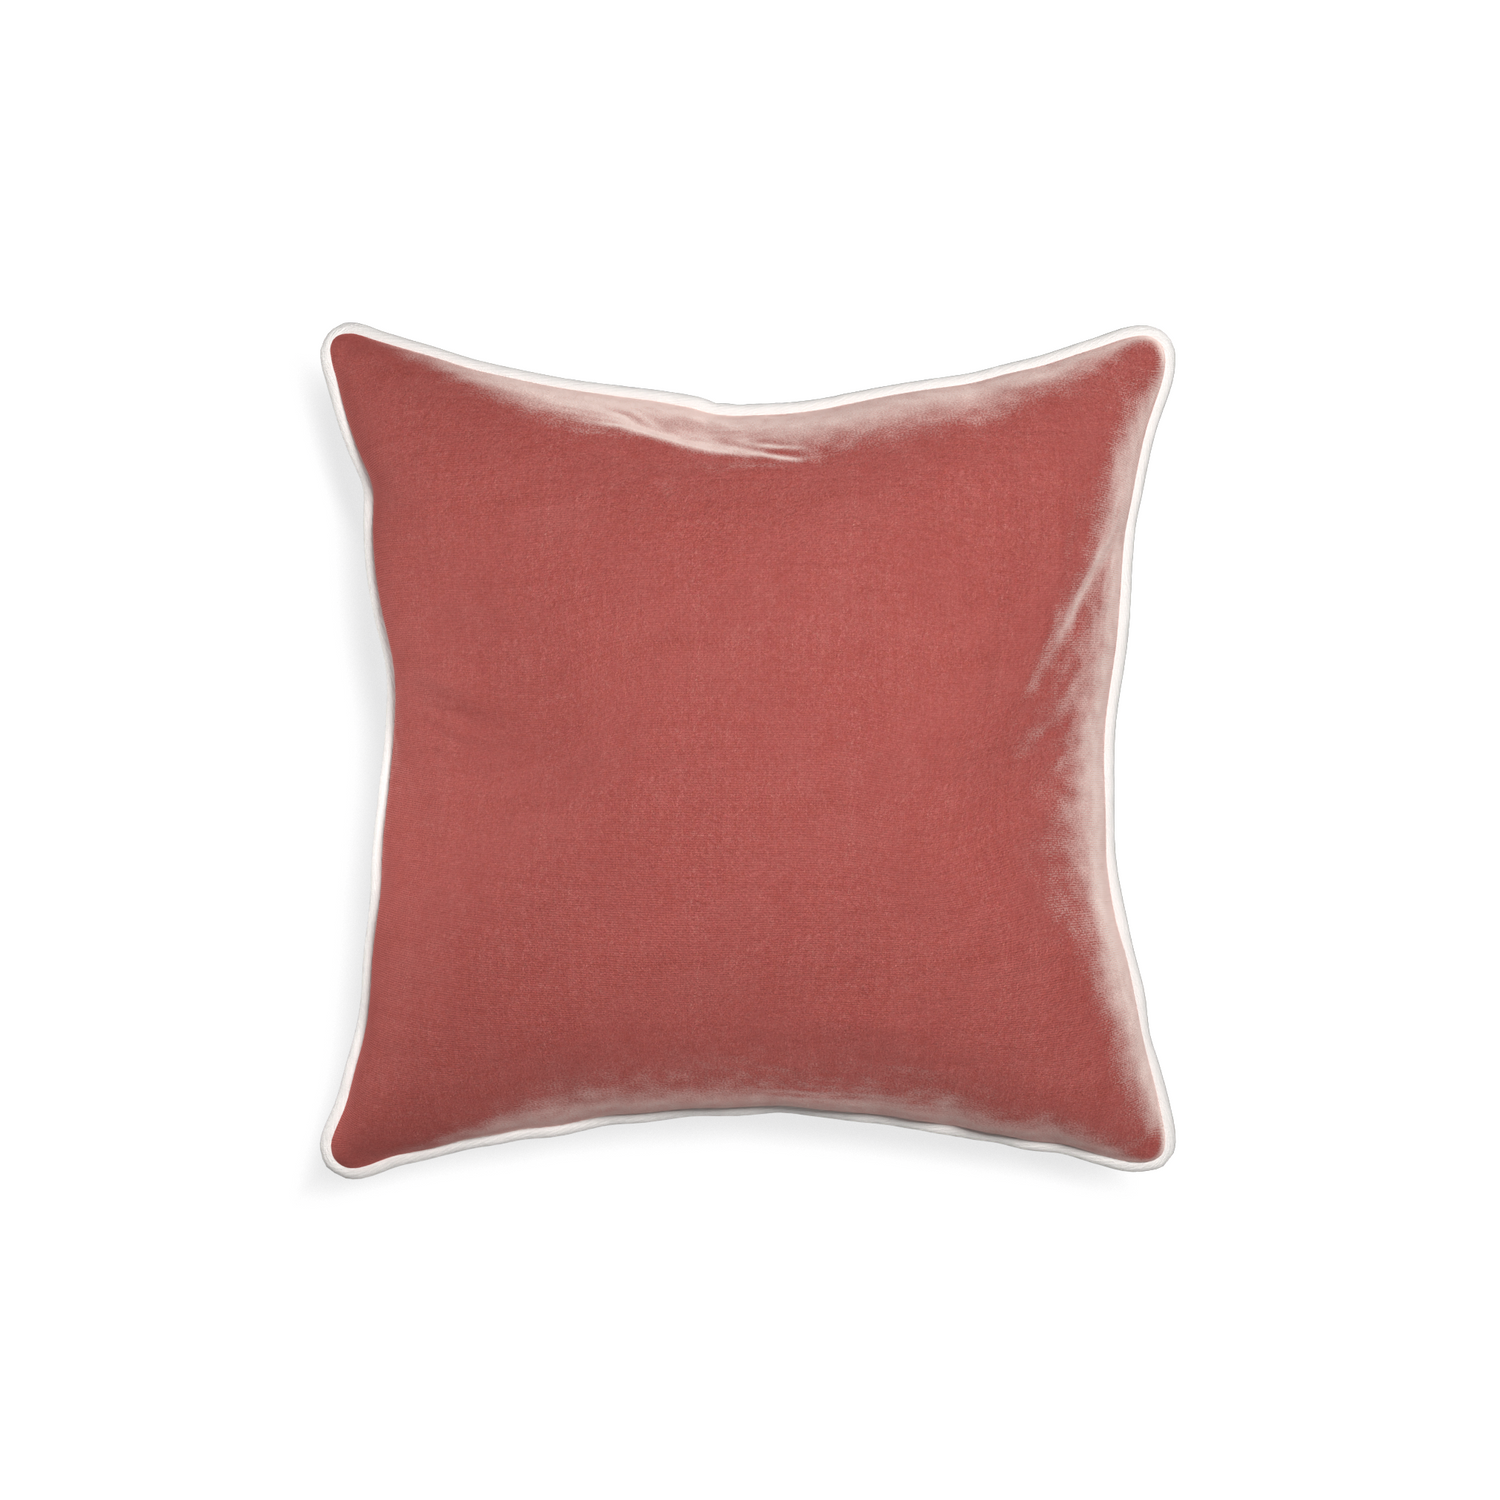 square coral velvet pillow with white piping 